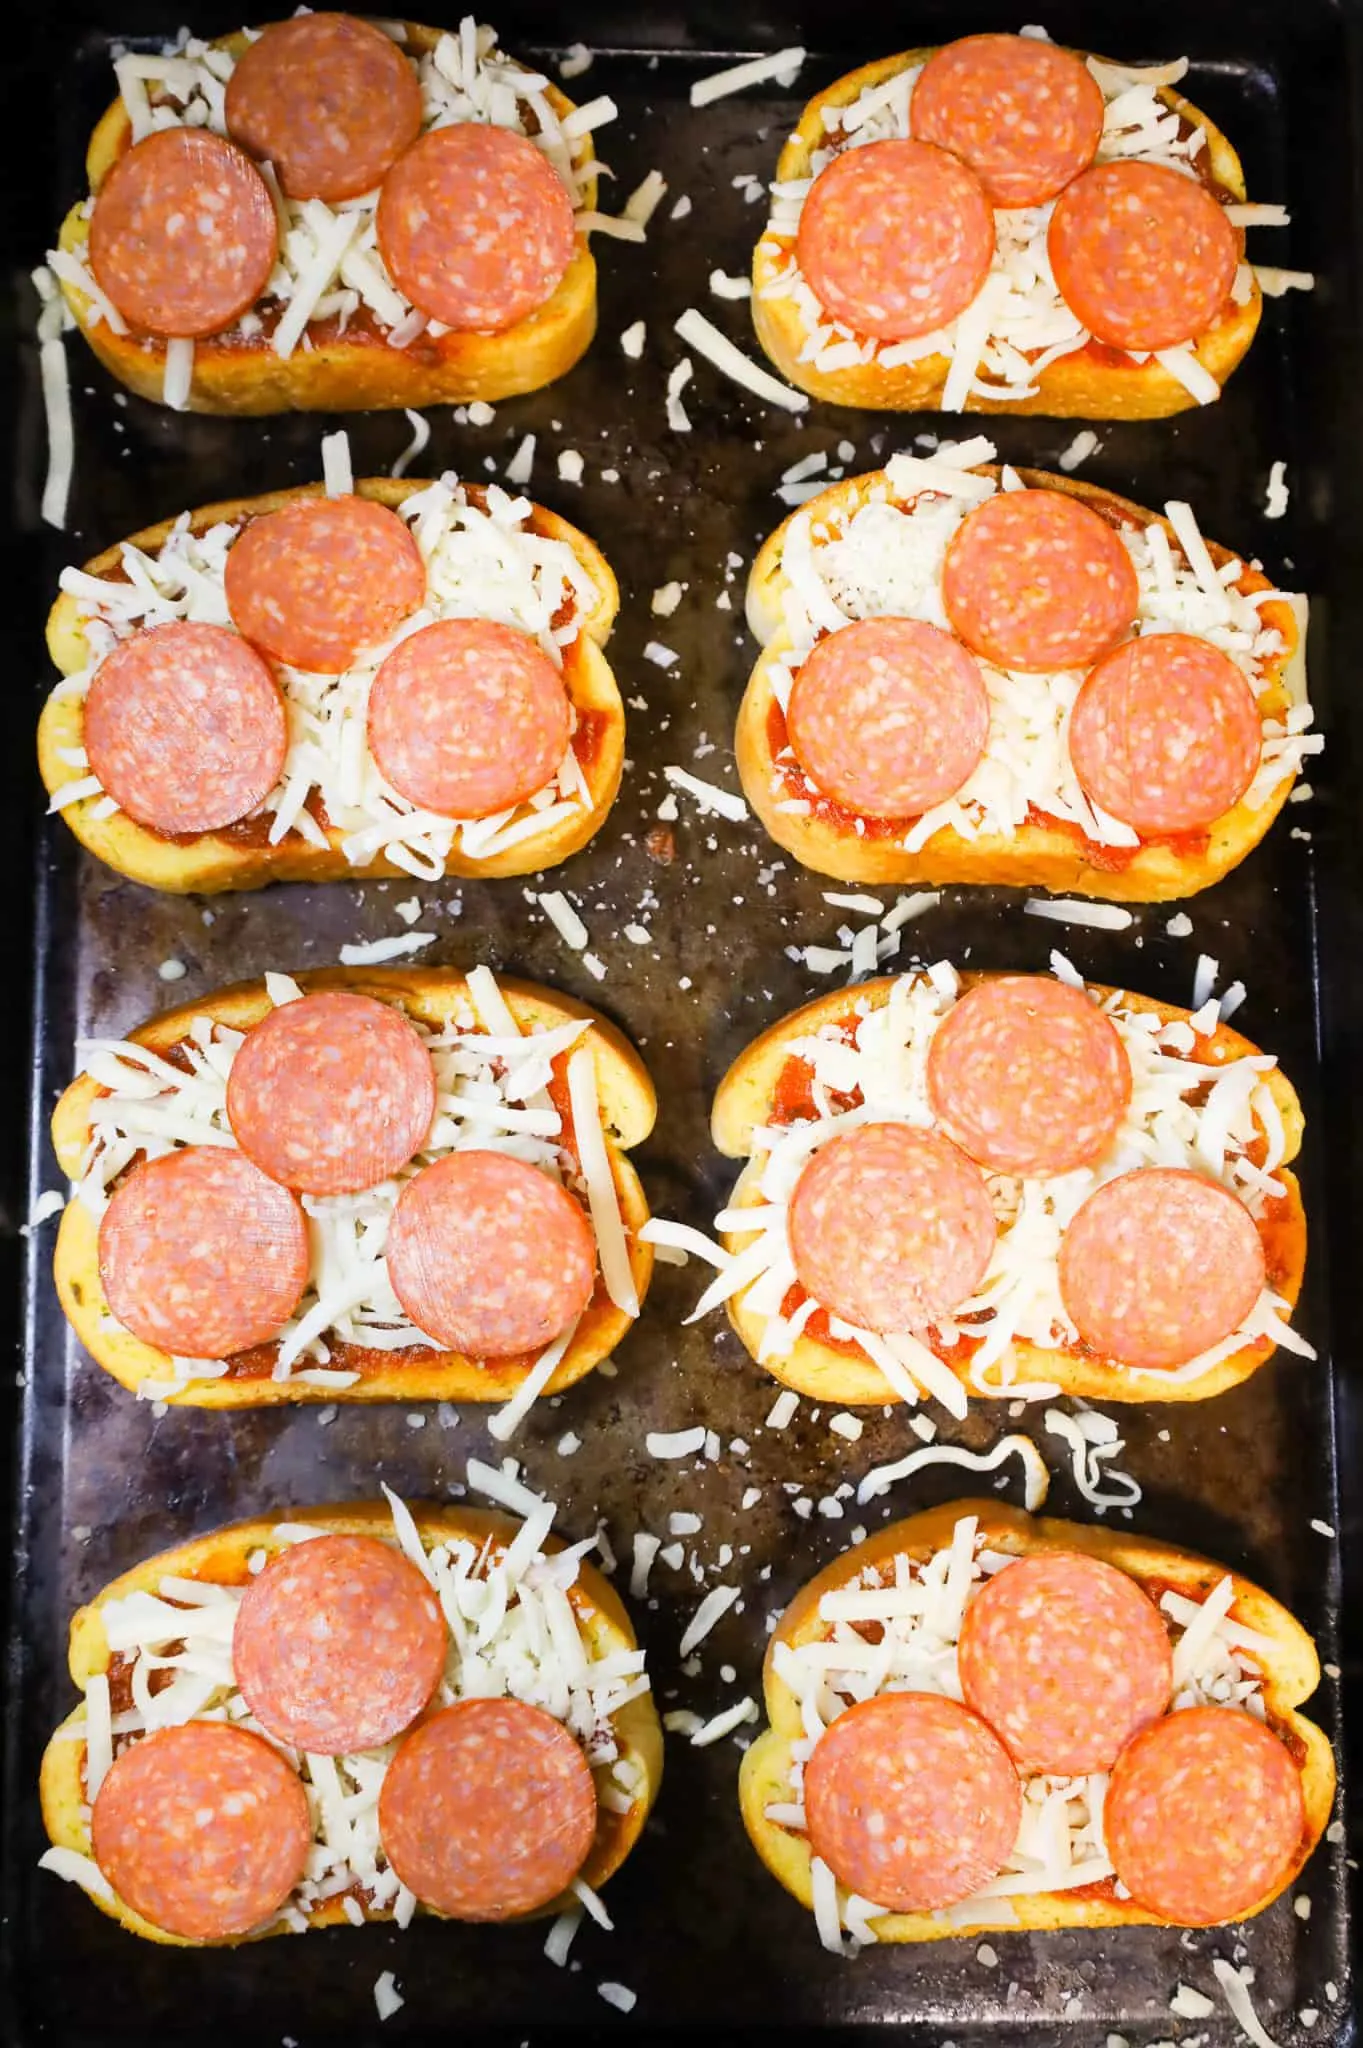 pepperoni slices, mozzarella cheese and pizza sauce on top of garlic texas toast slices on a baking sheet